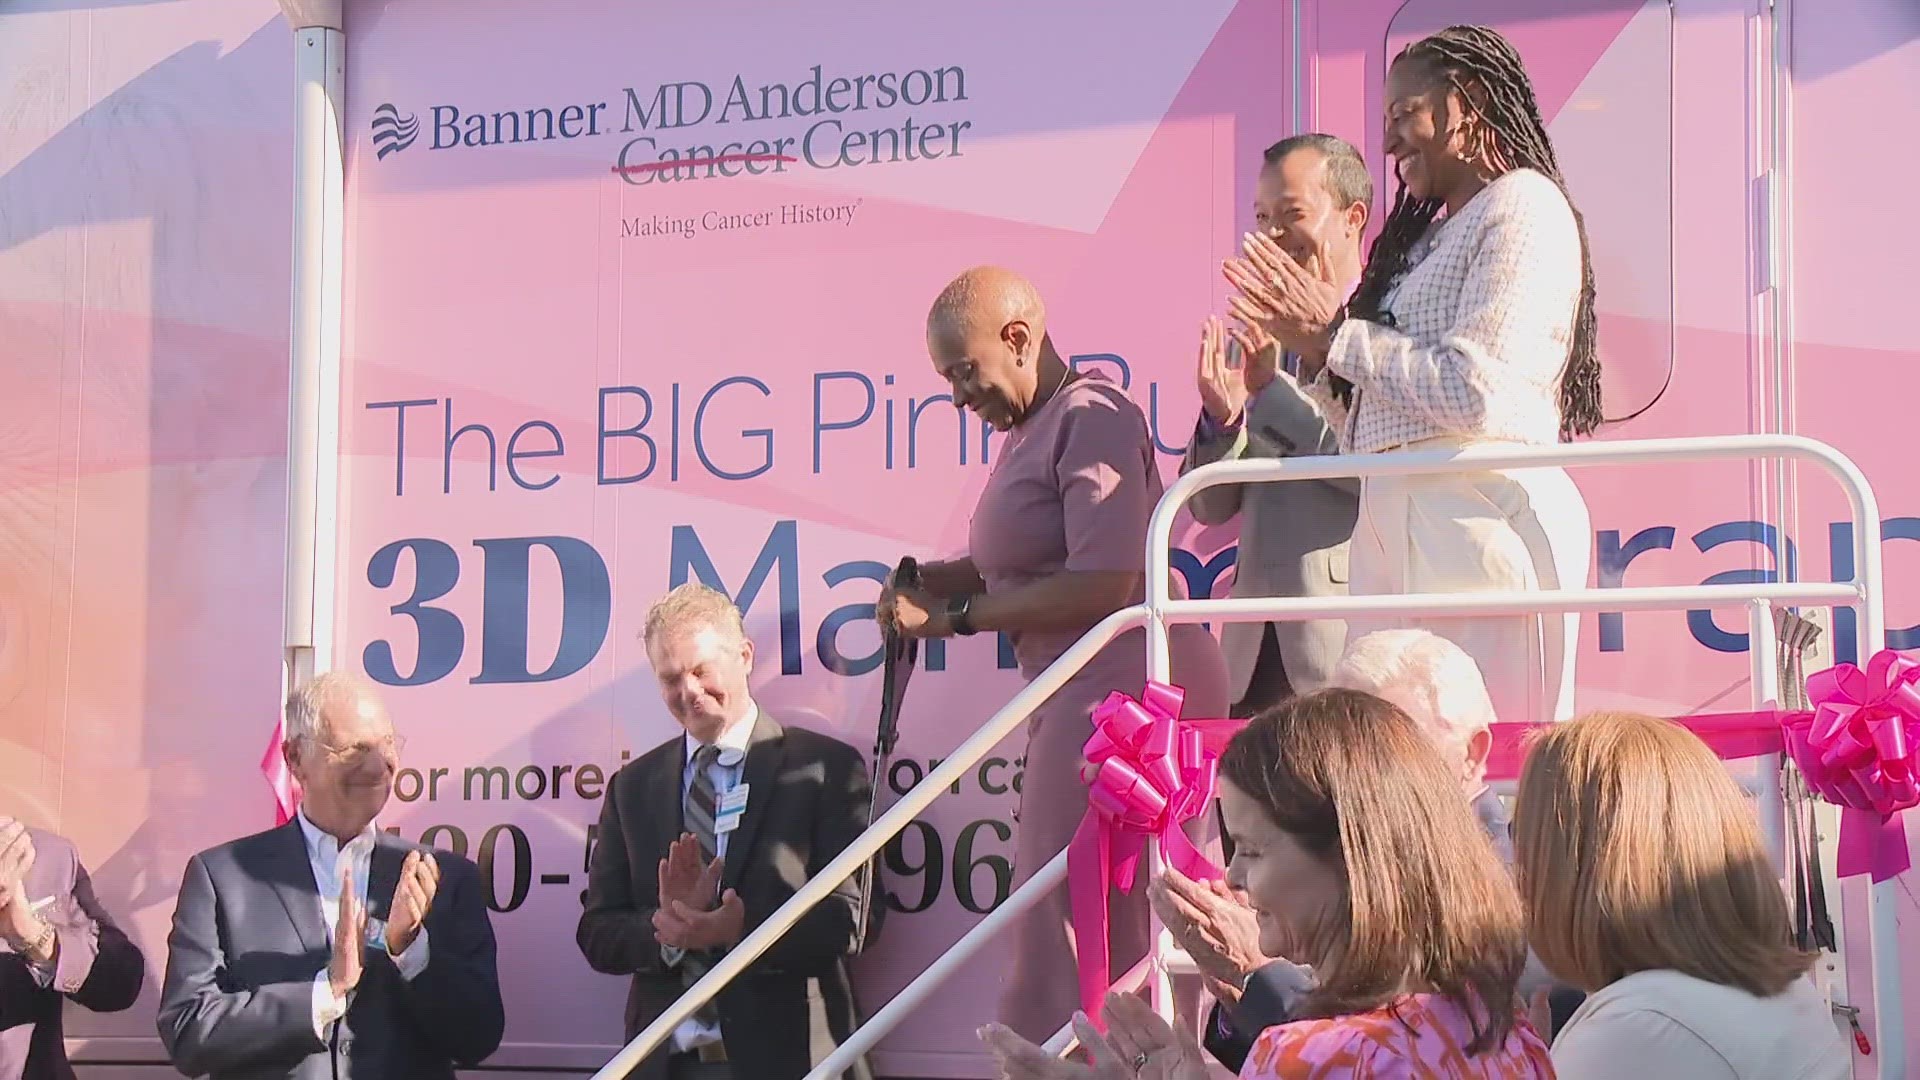 The mobile mammogram screening unit will offer free 3D screenings to thousands.